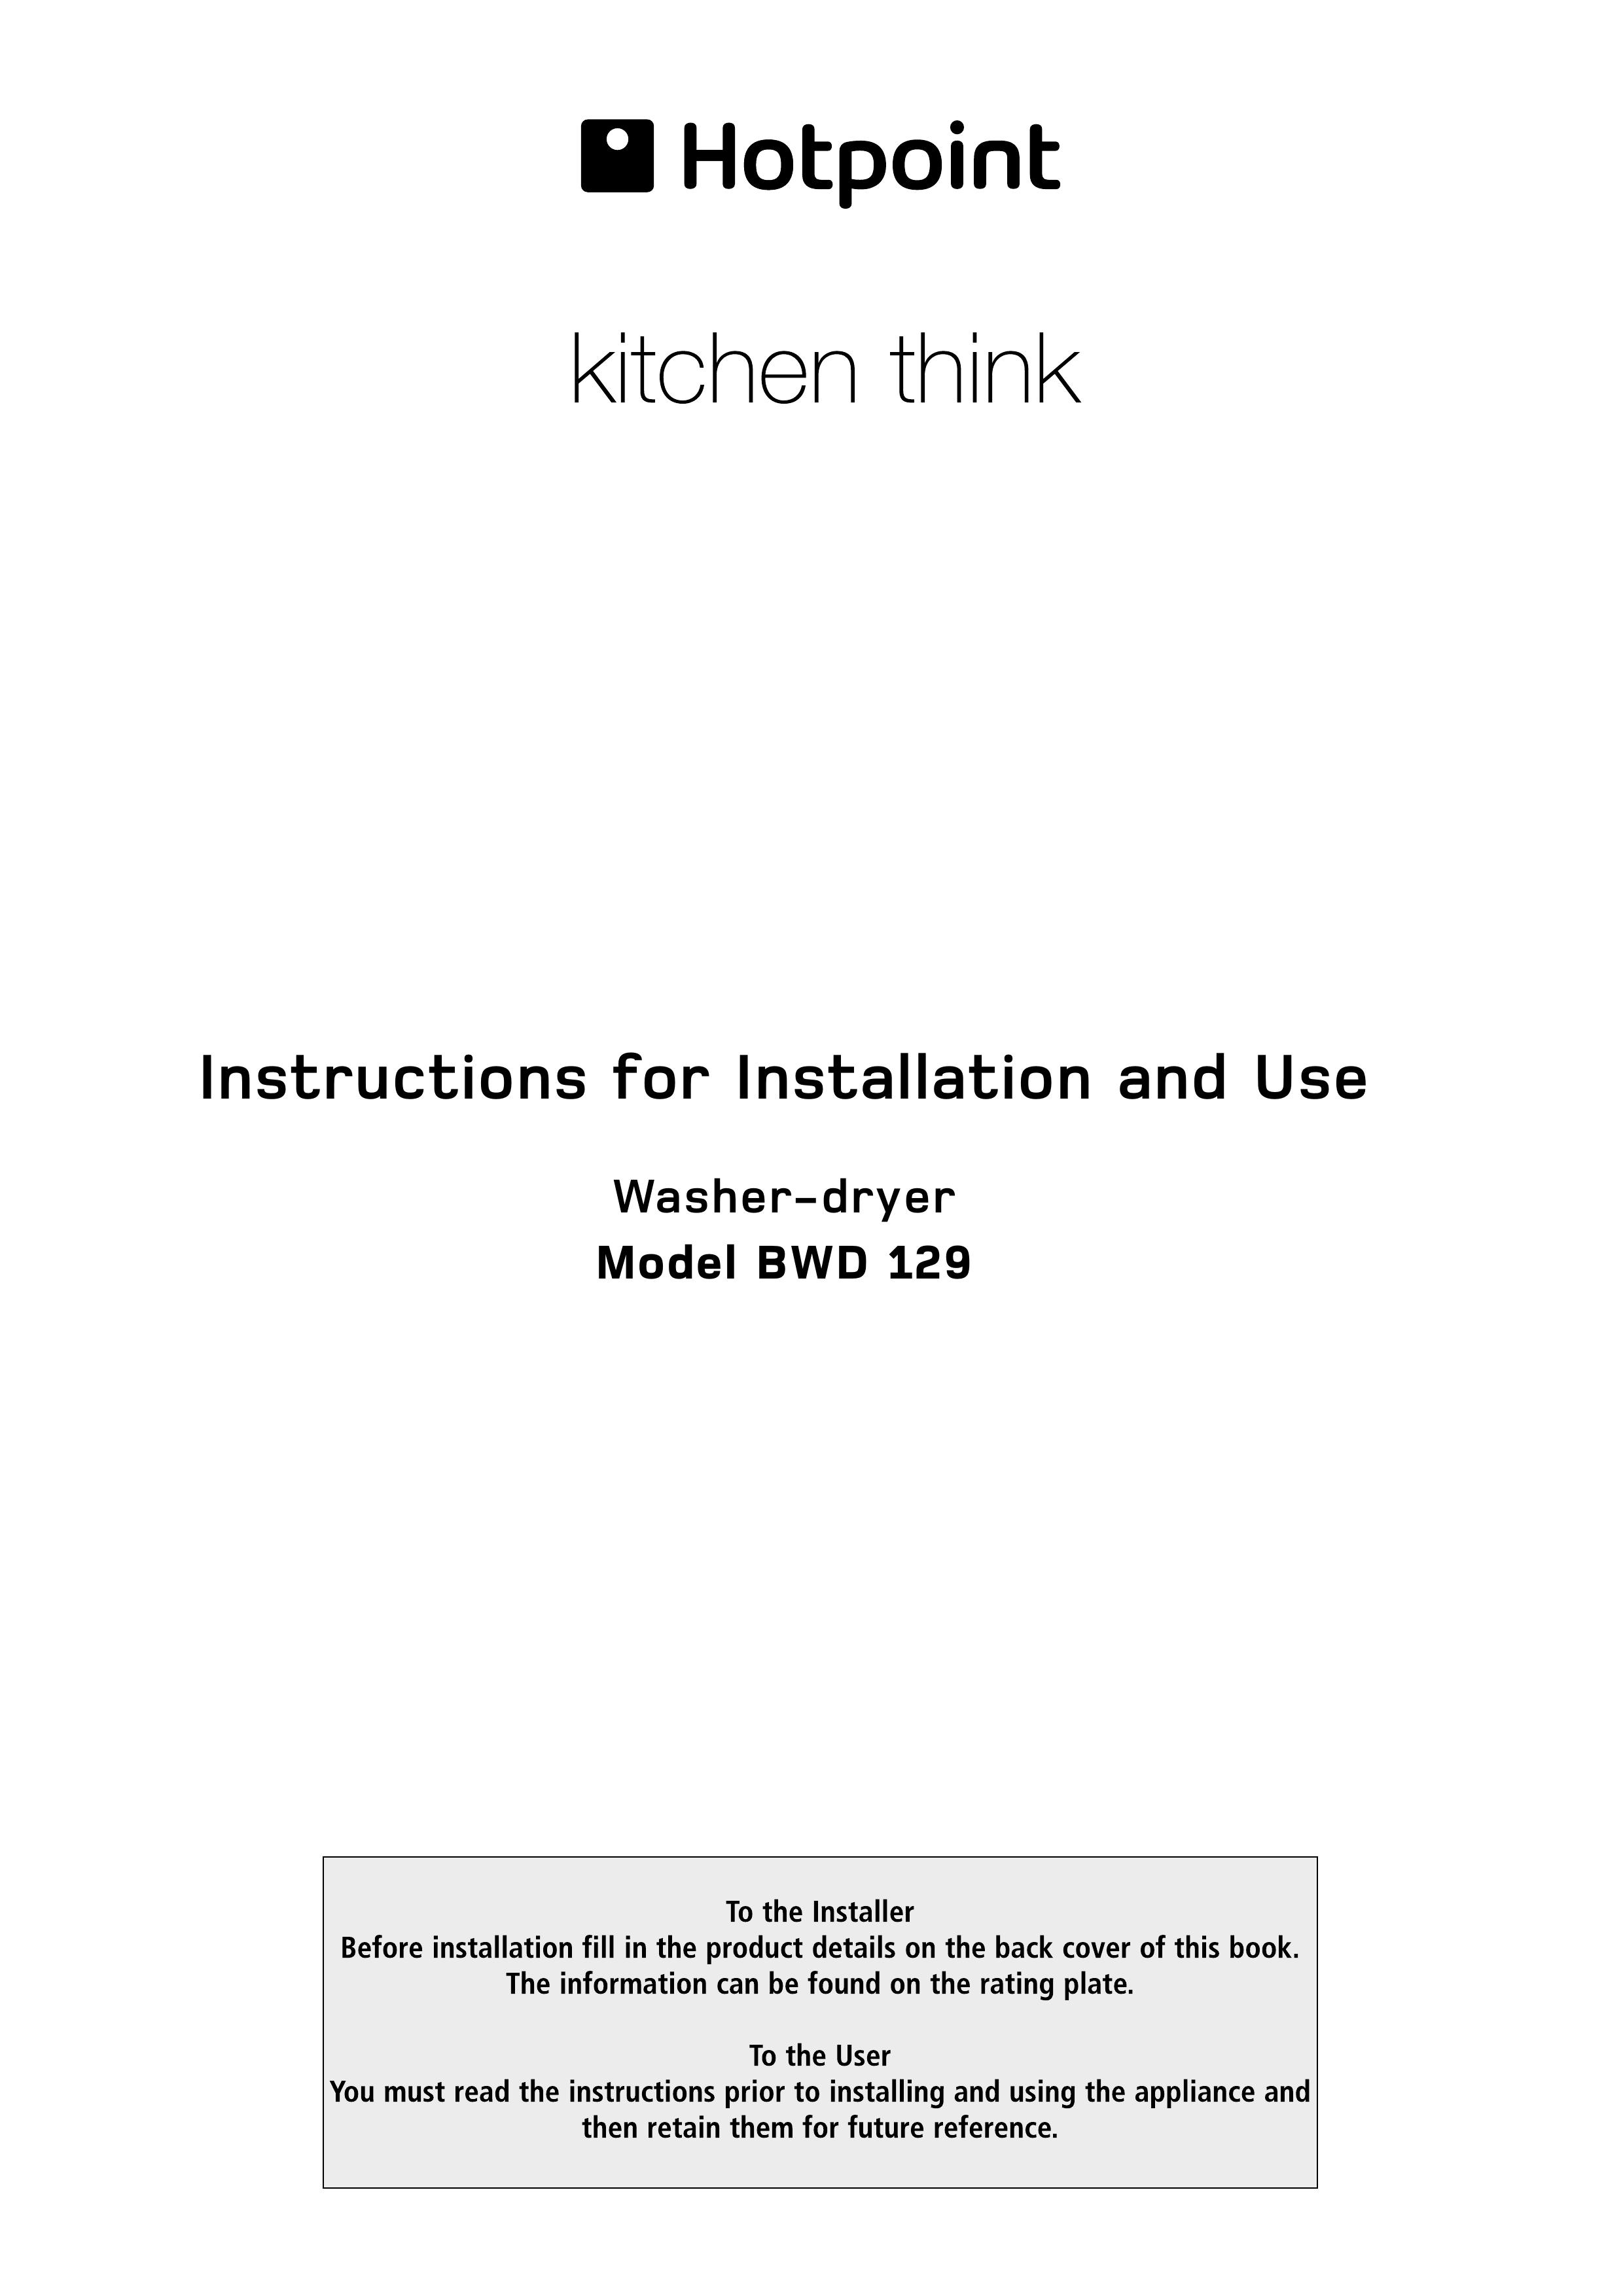 Hotpoint BWD 129 Washer/Dryer User Manual